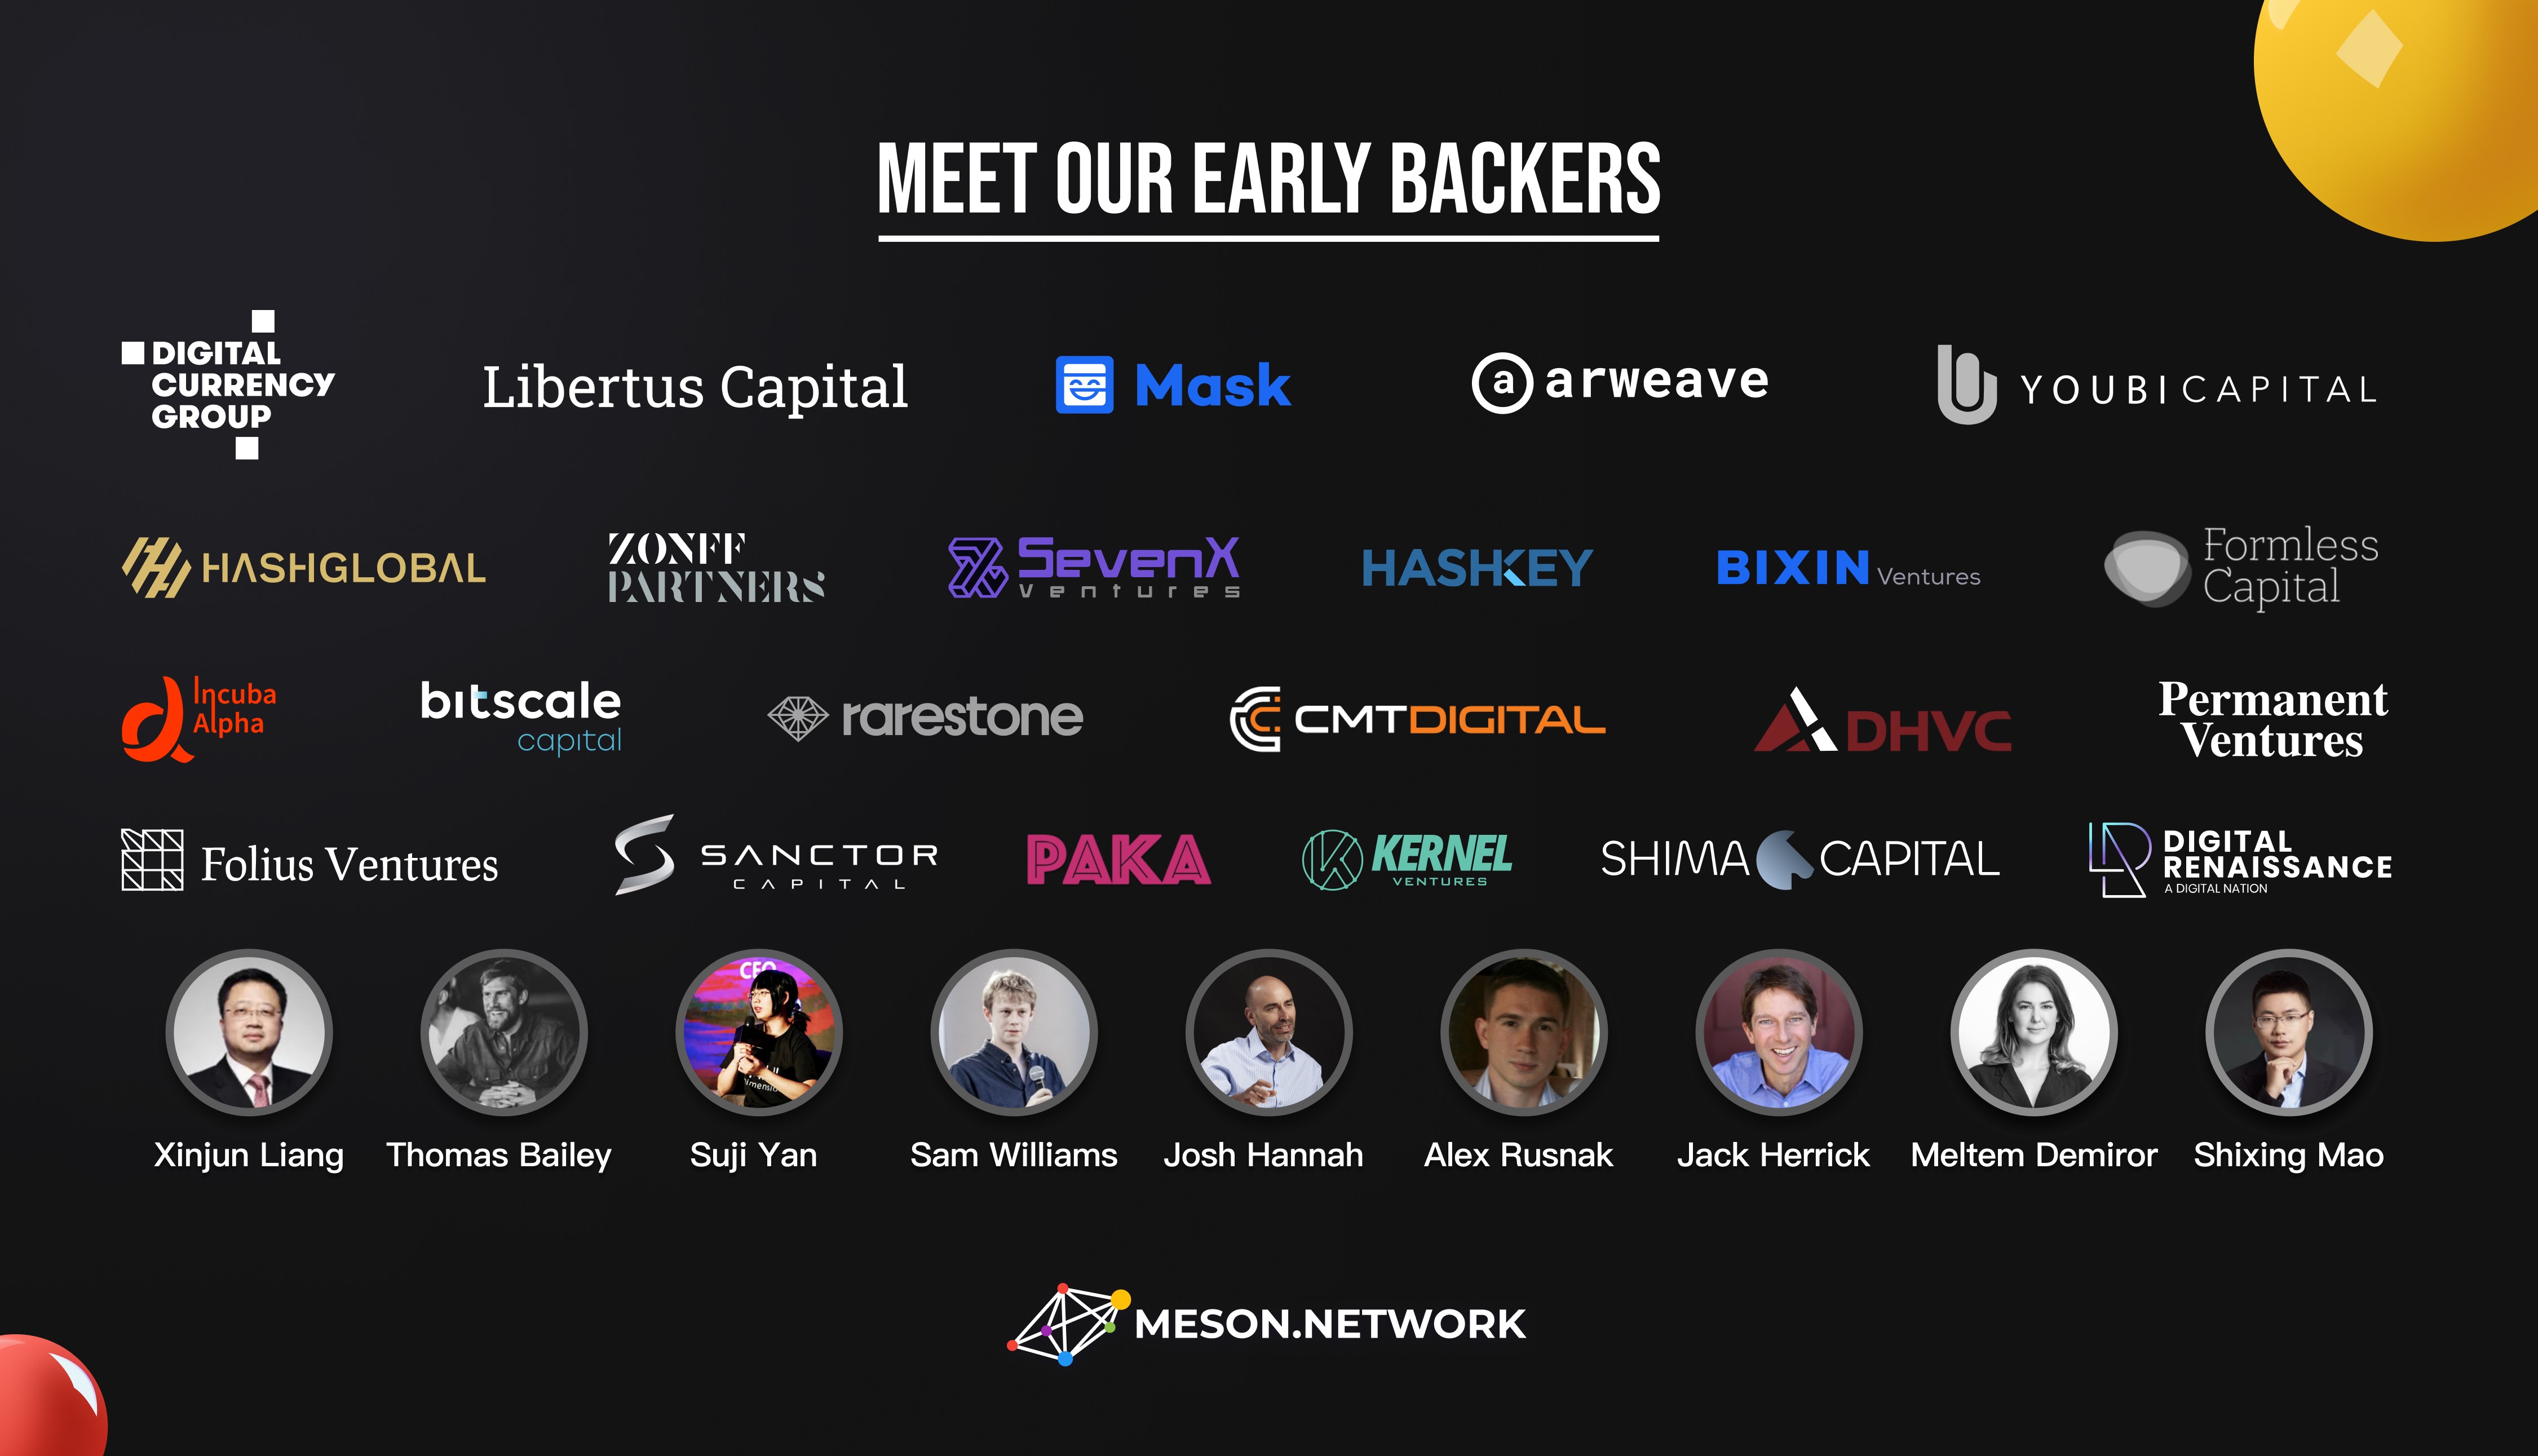 Meet Our Early Backers